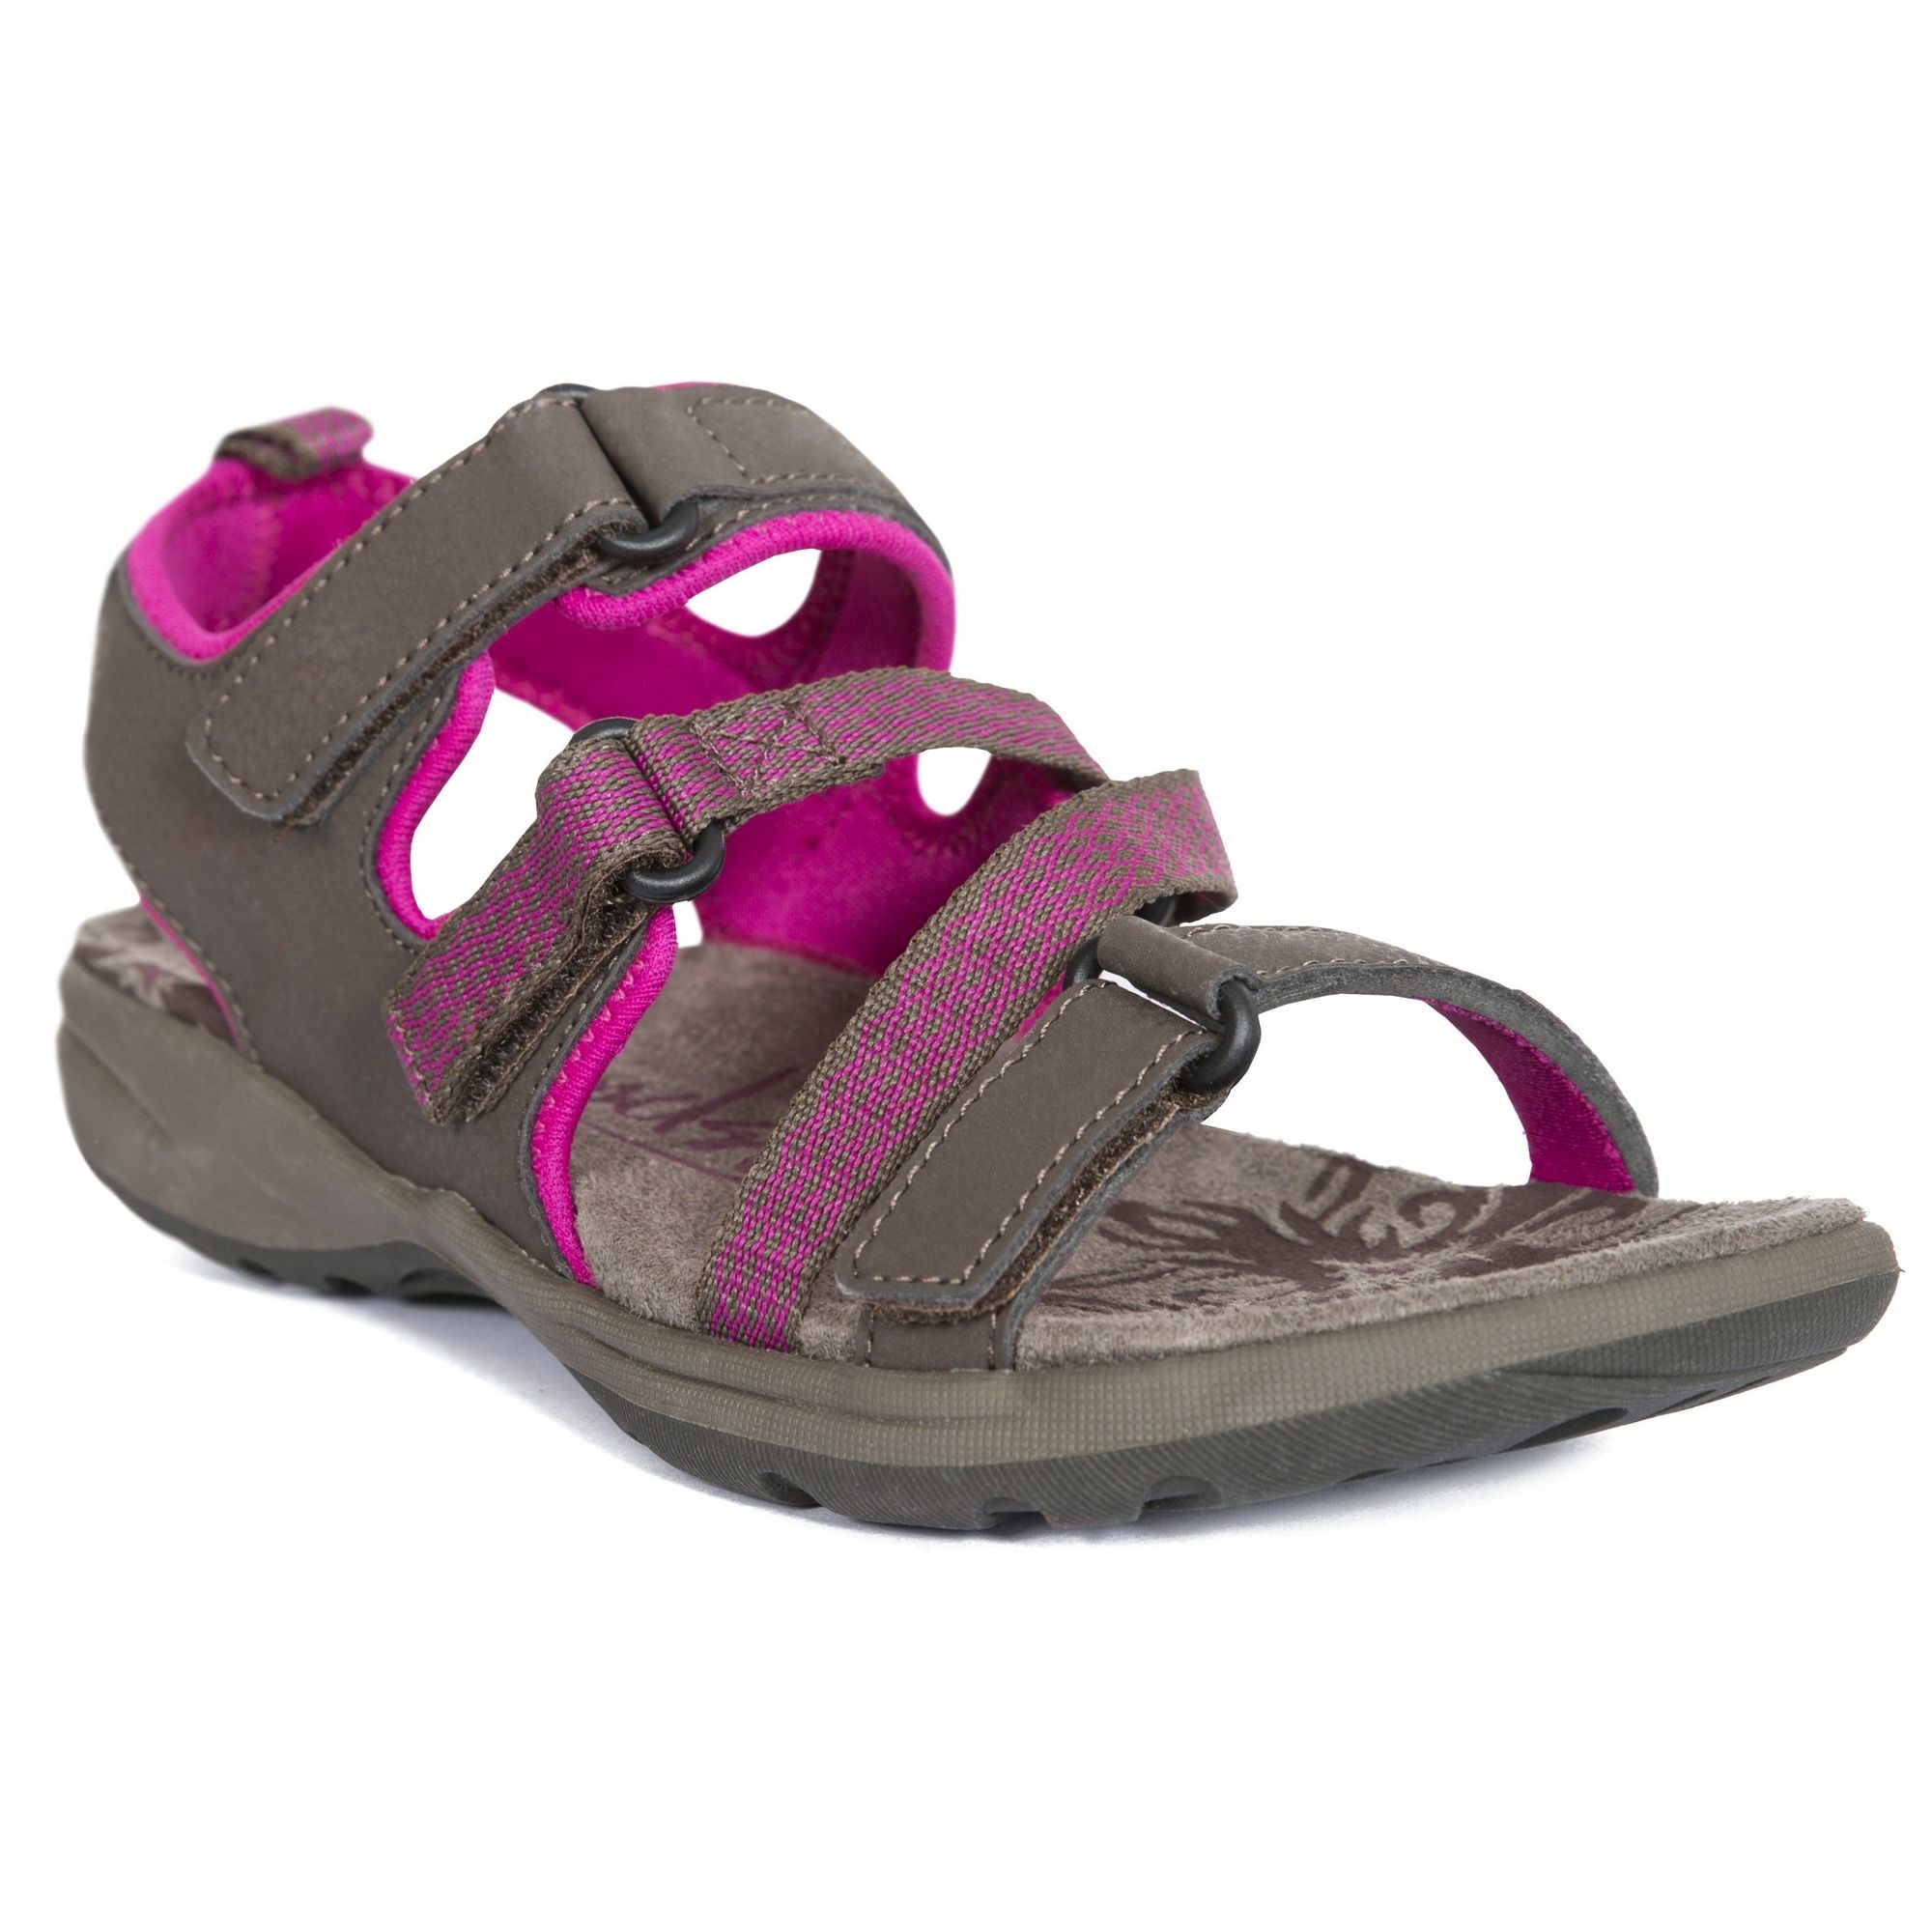 Womens active sandals with positive fit 3-point adjustment. Cushioned and moulded footbed. Durable traction outsole. Fabric: upper- PU/Textile, midsole- moulded EVA, outsole- TPR. Shoe sizing: 3 UK/36 EU, 4 UK/37 EU, 5 UK/38 EU, 6 UK/39 EU, 7 UK/40 UK, 8 UK/41 EU.